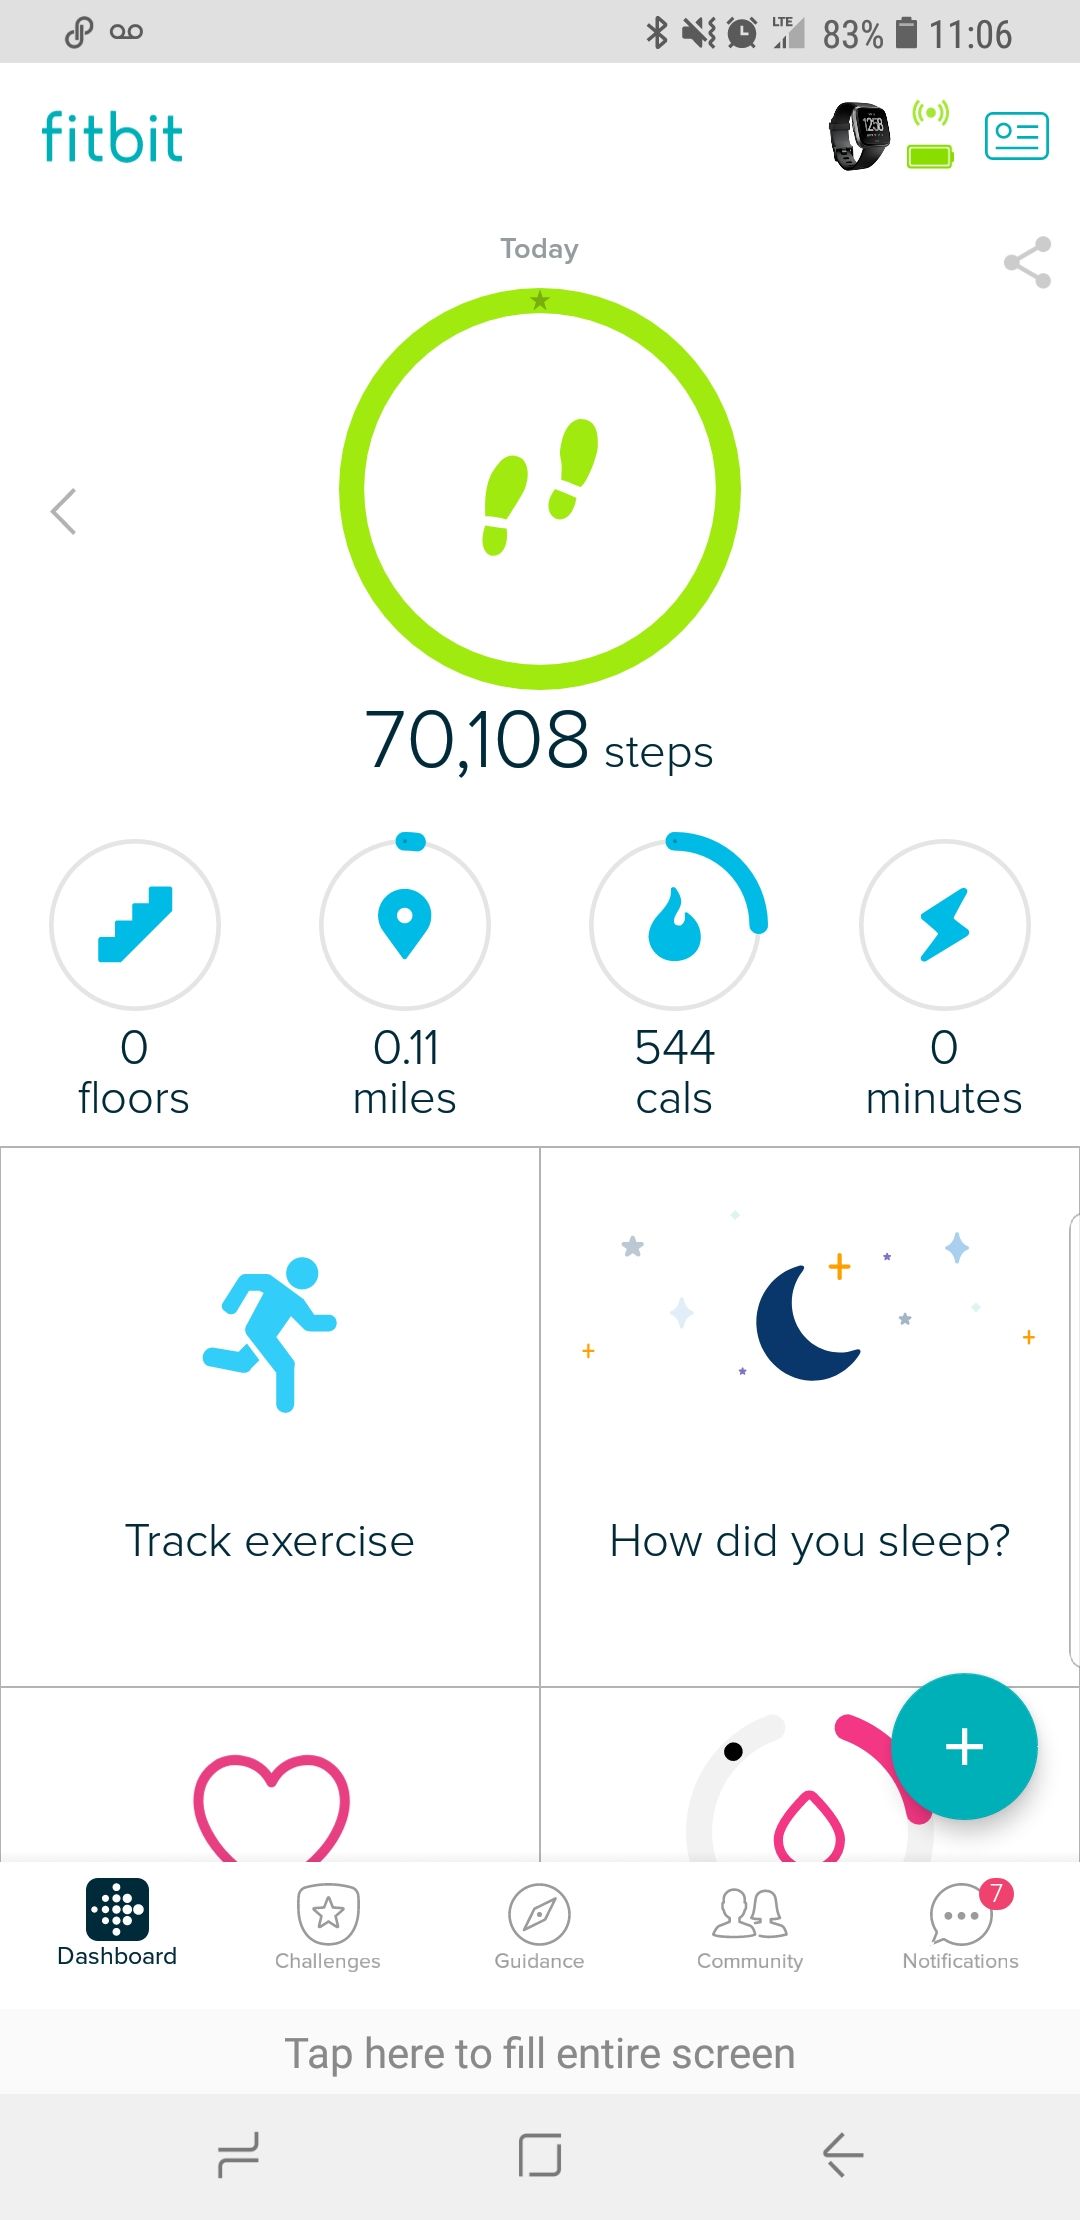 fitbit step counter